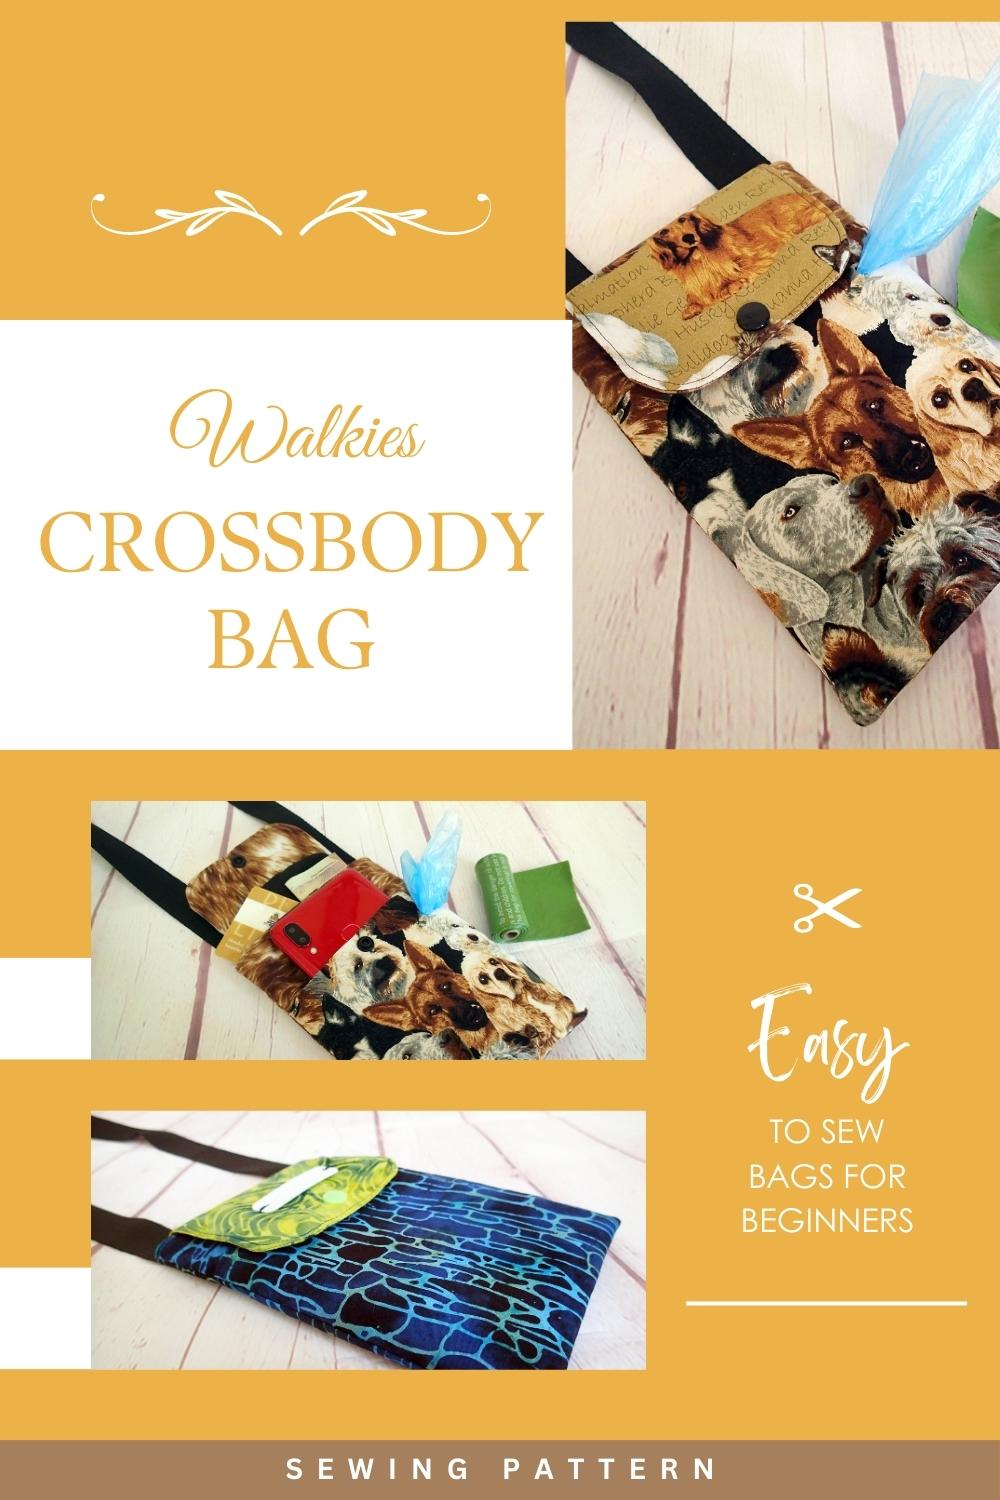 A very quick and easy bag to sew for beginners. The Walkies Doggie Crossbody Bag sews up as an easy cell phone pouch pattern with shoulder or crossbody strap. The perfect bag to sew for beginners, it is scrap friendly, doesn't use expensive materials, and is great as an easy project to sew and sell. Dog walking bag sewing pattern for doggy waste bags. SewSimpleBags